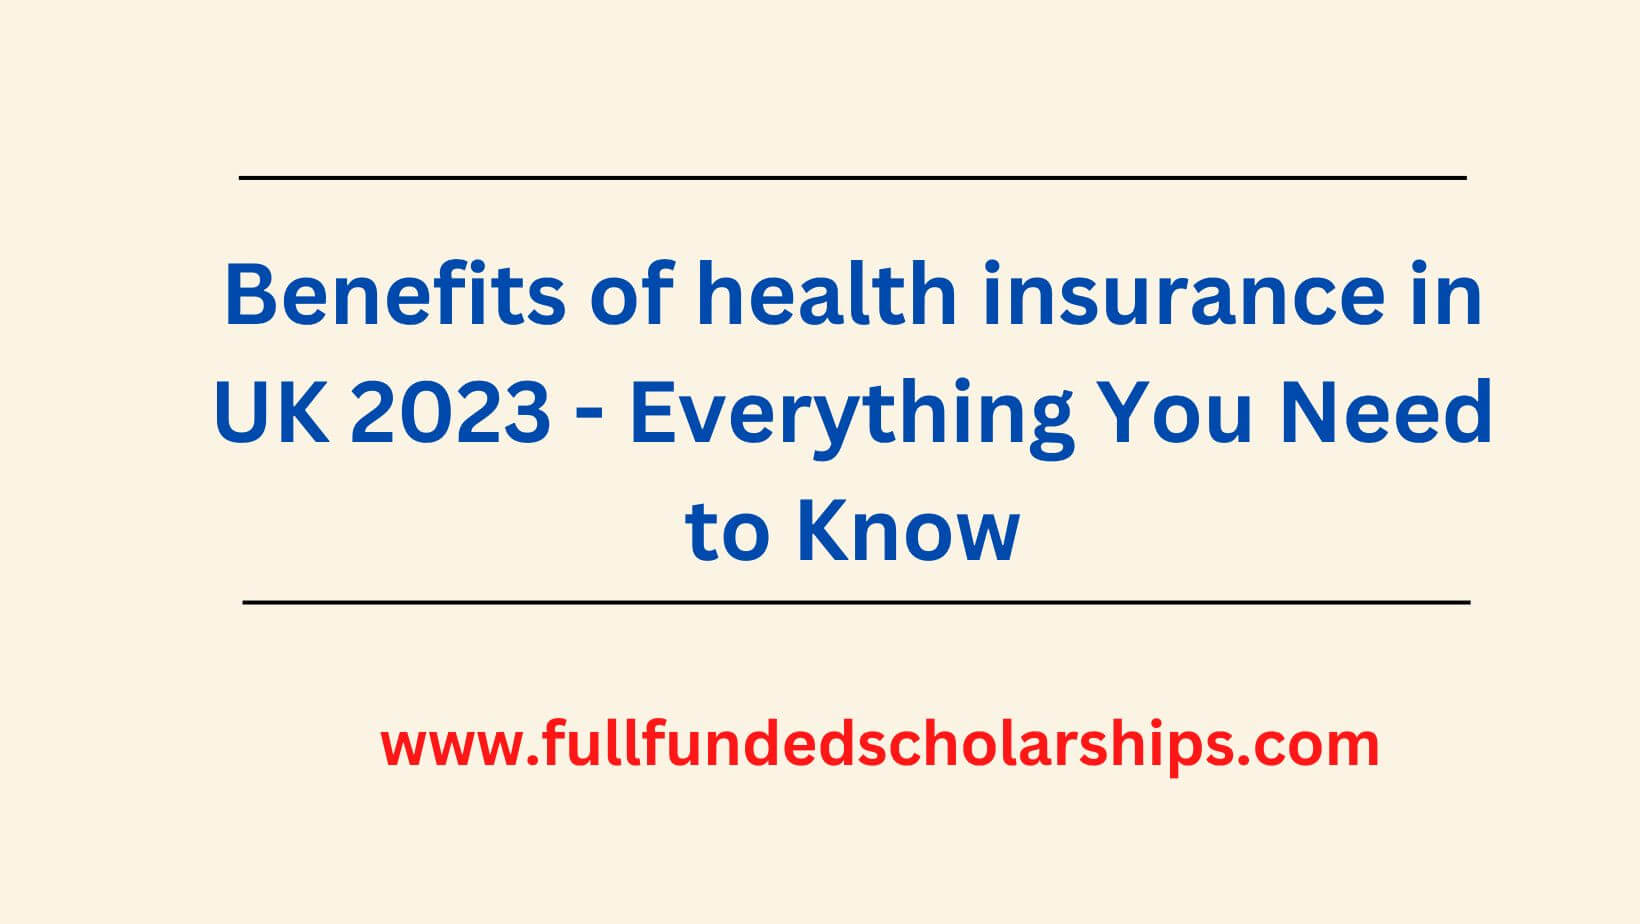 Benefits of health insurance in UK 2023 - Everything You Need to Know